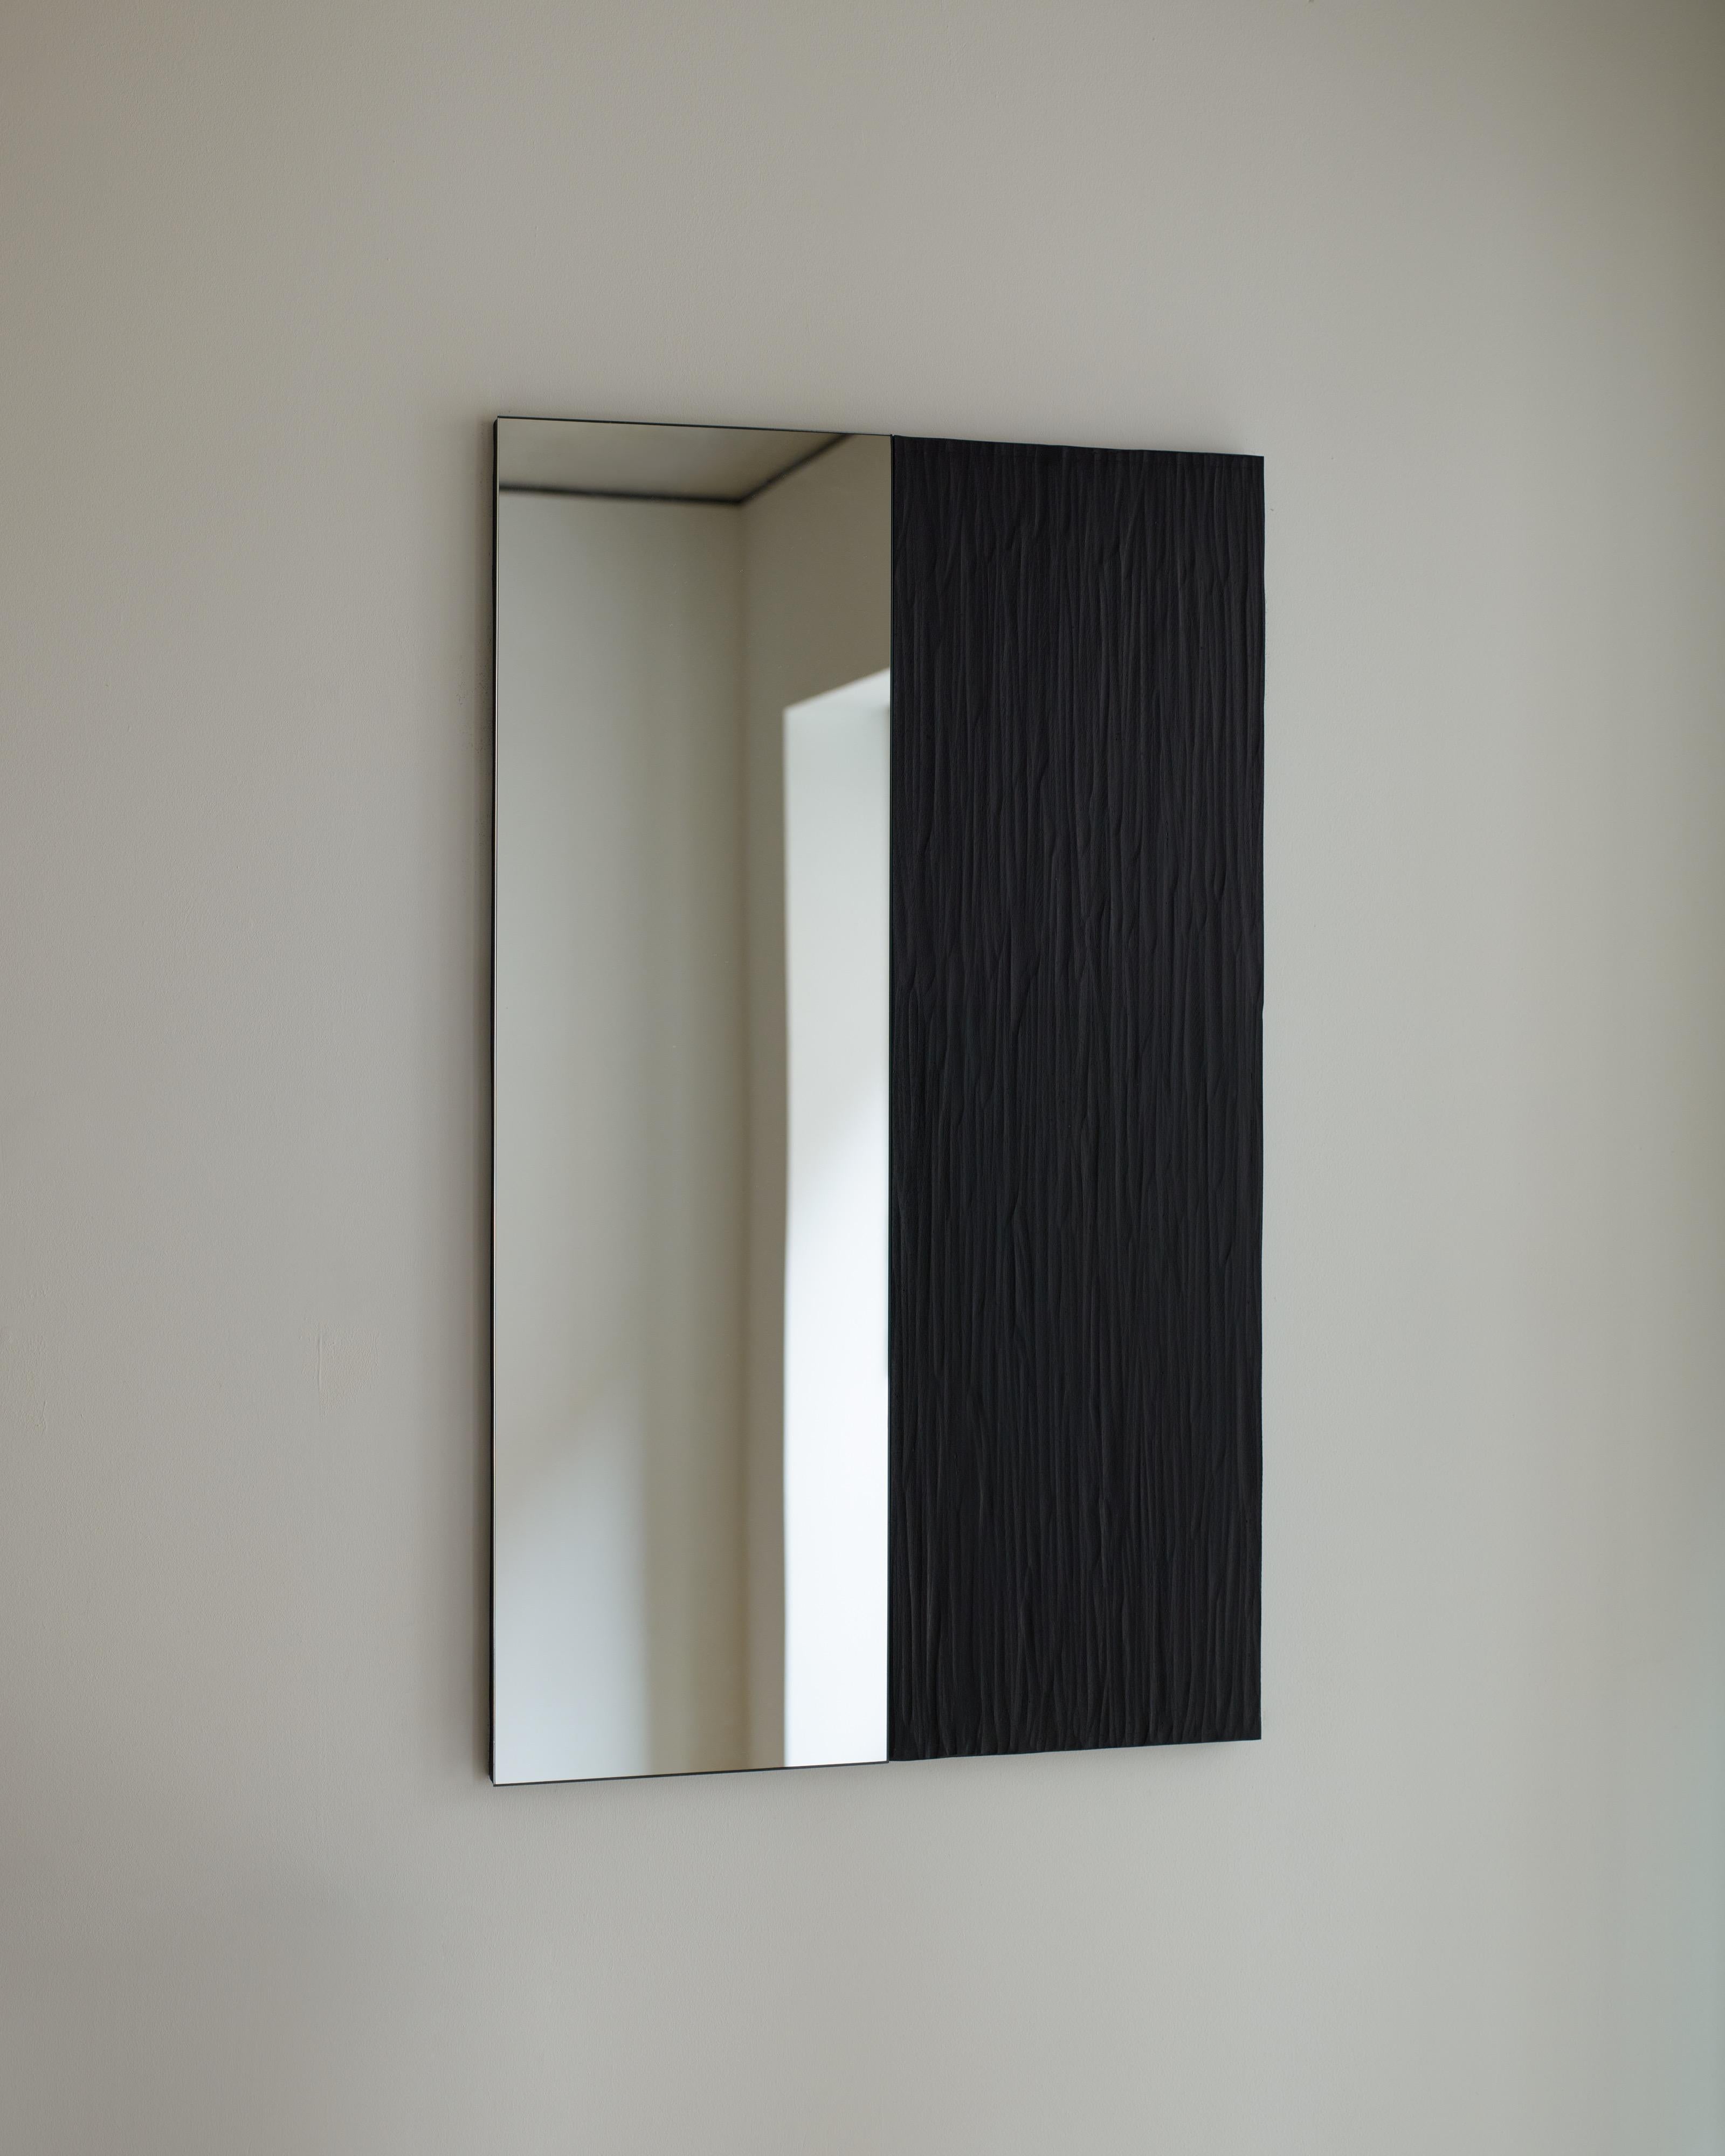 'Talisman mirror No. 4' by Rooms Studio is a single paned wall-mounted mirror with a hand-carved and blackened oak side panel. This work is part of a limited edition series entitled Talisman Mirrors, whose forms unapologetically borrow from